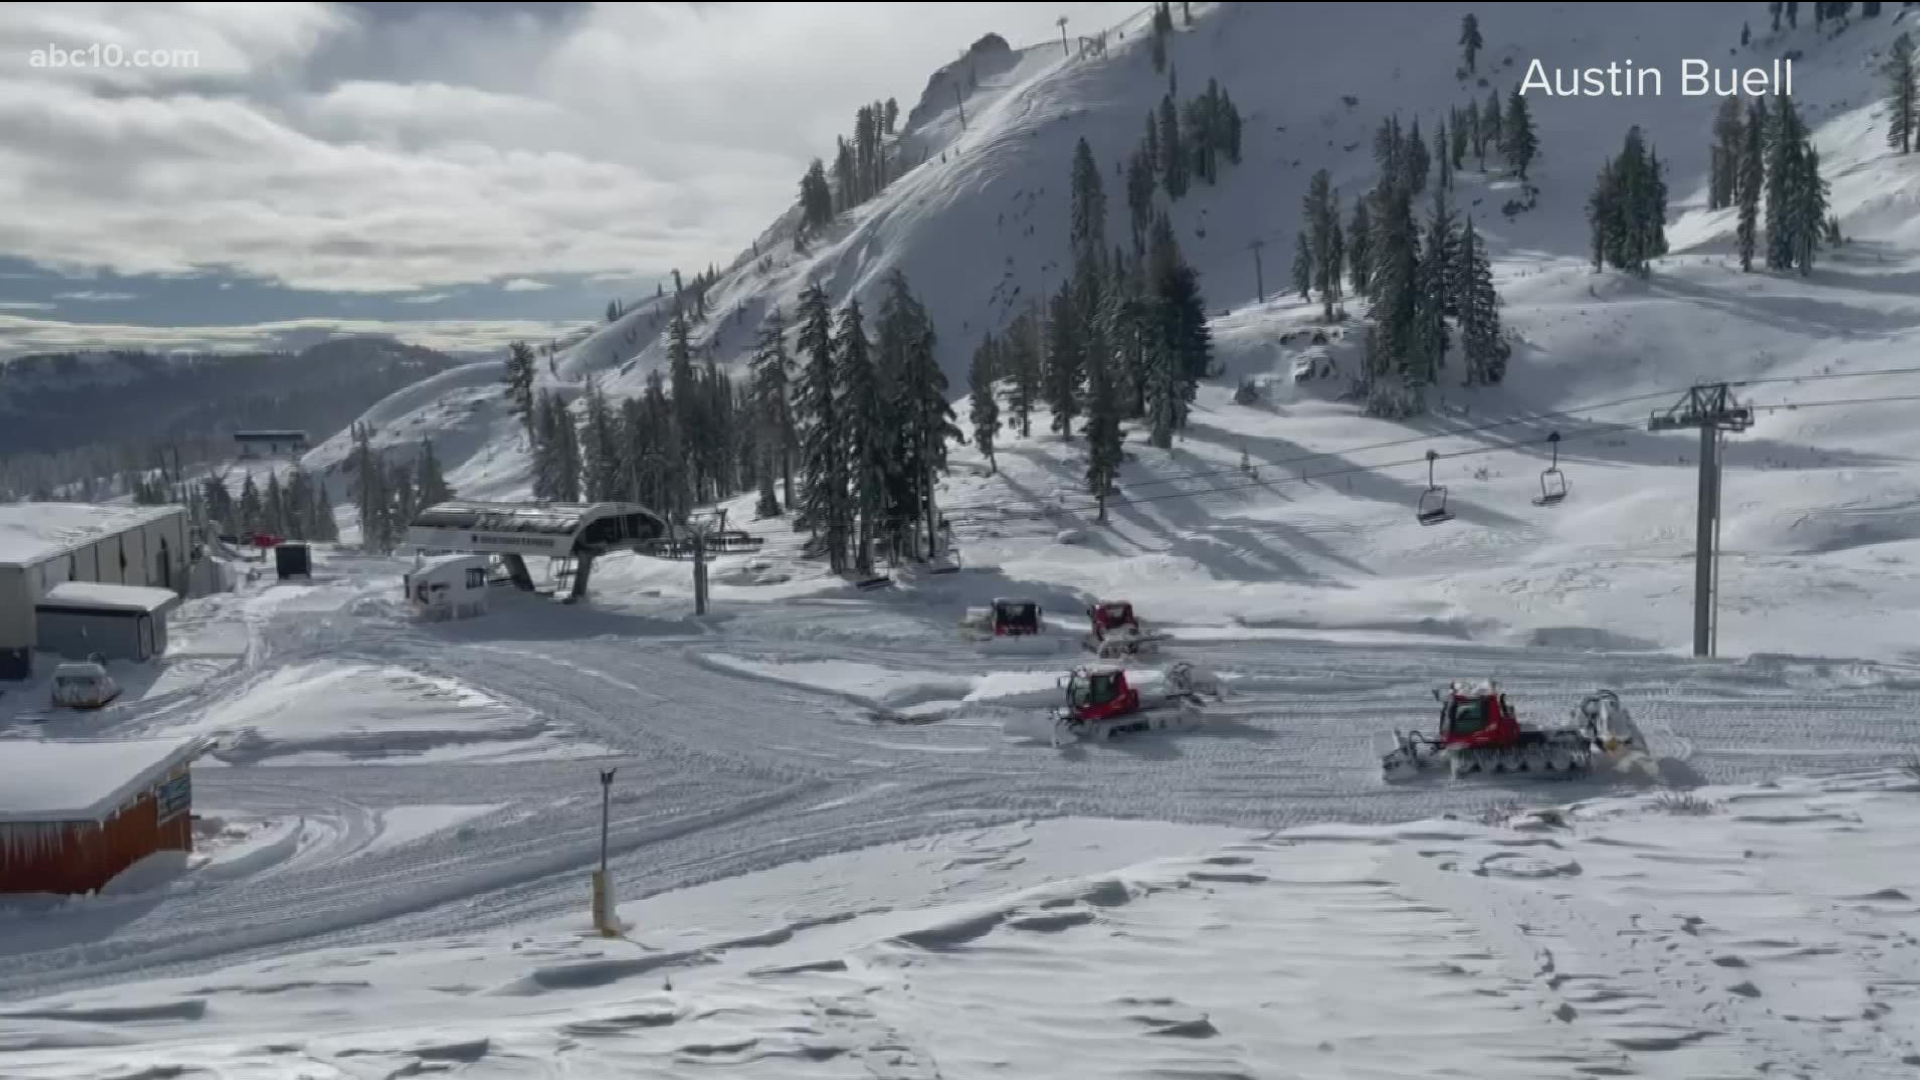 The extreme weather conditions of the past week also resulted in blankets of record snowfall for Palisades Tahoe ski resort, that's when they saw a rare opportunity.